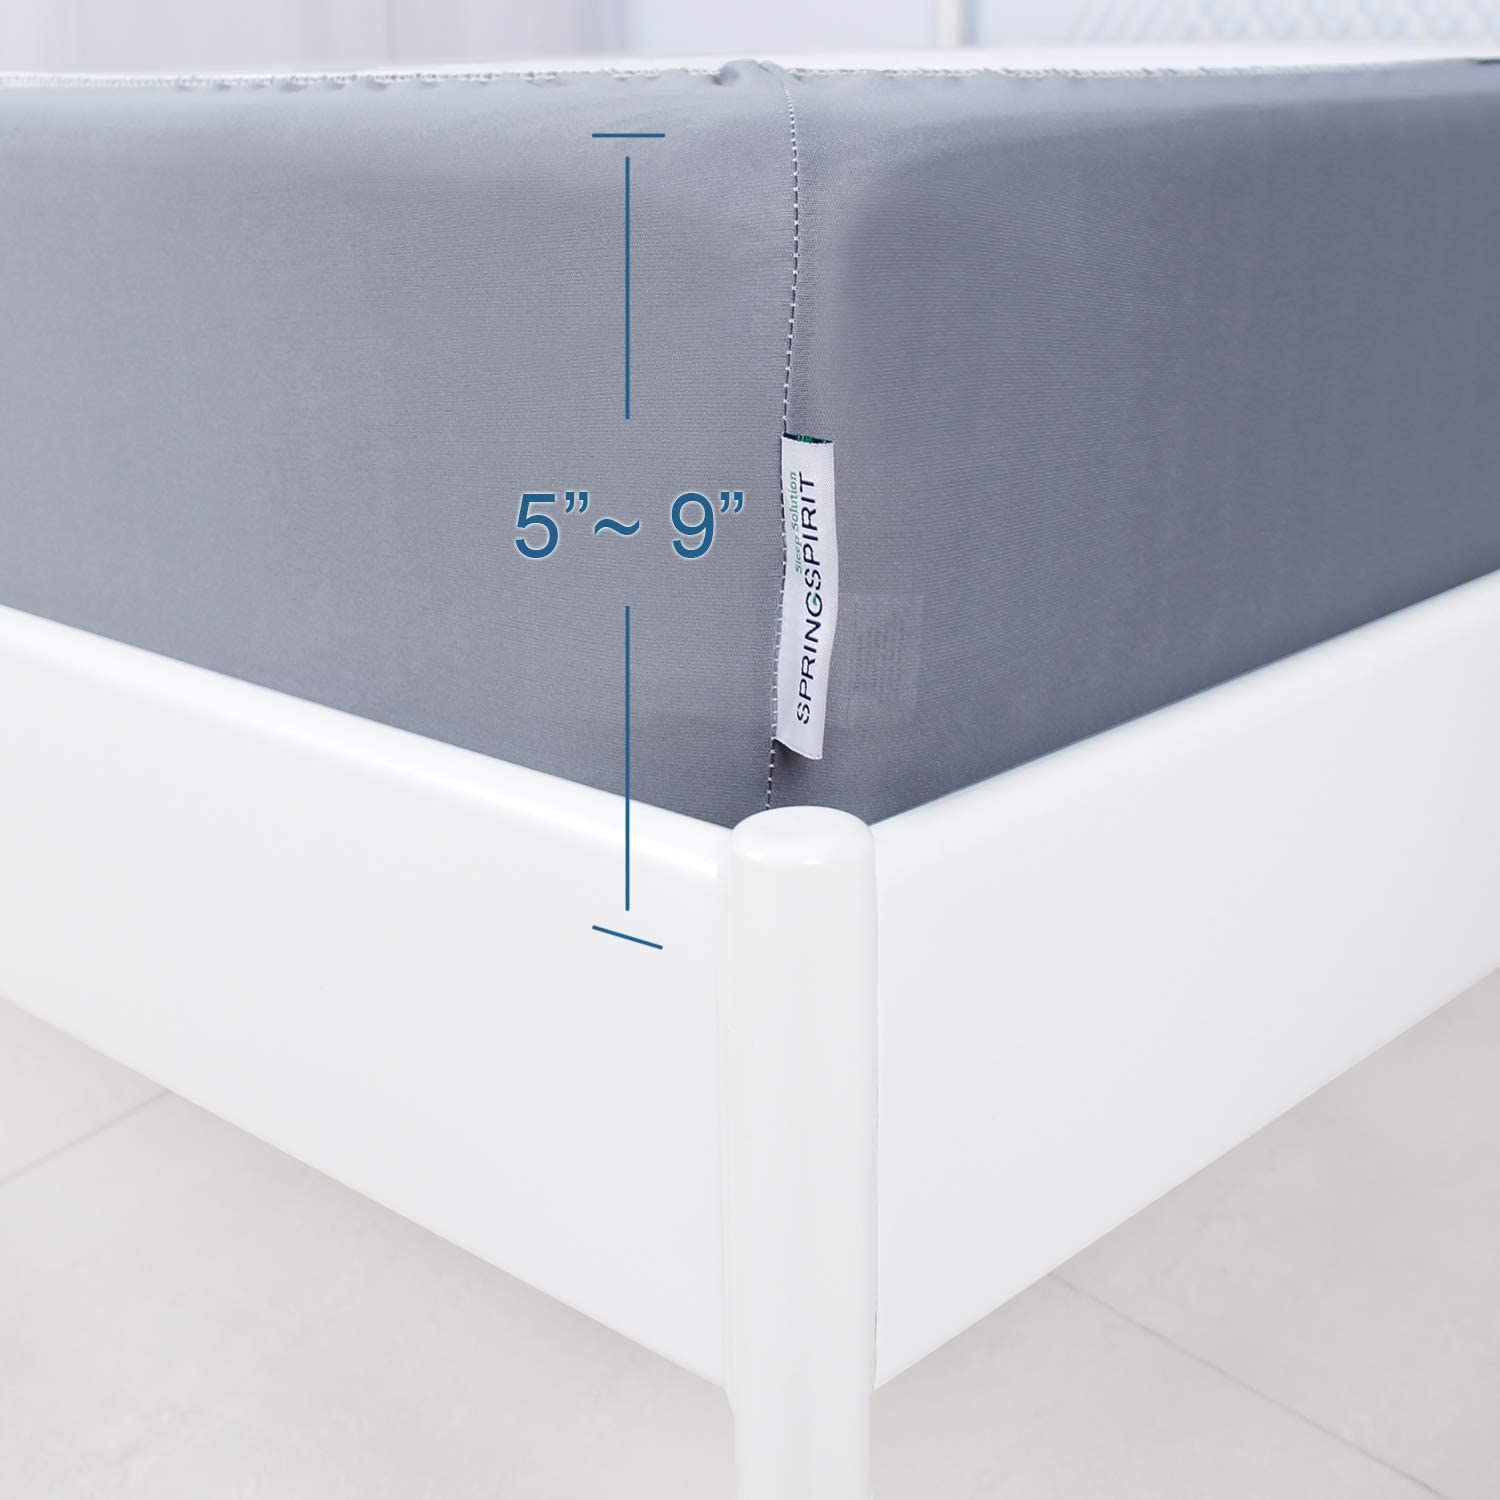 Know the difference between a box spring cover vs. bed skirt vs. dust ruffle.